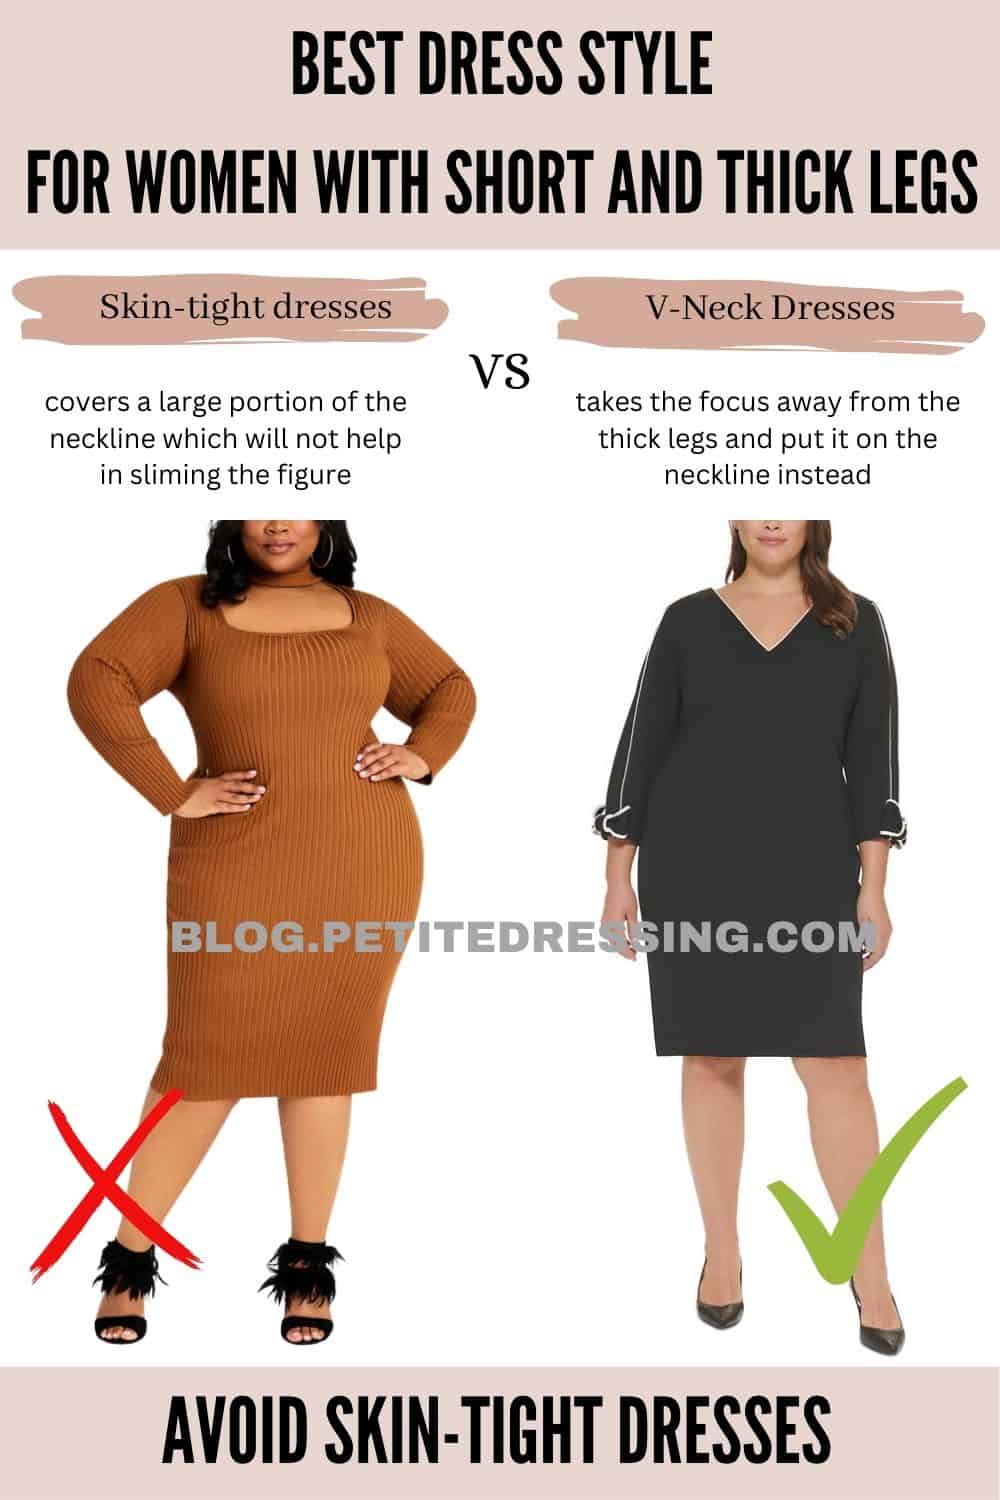 Dress Style Guide for Women with Short and Thick Legs